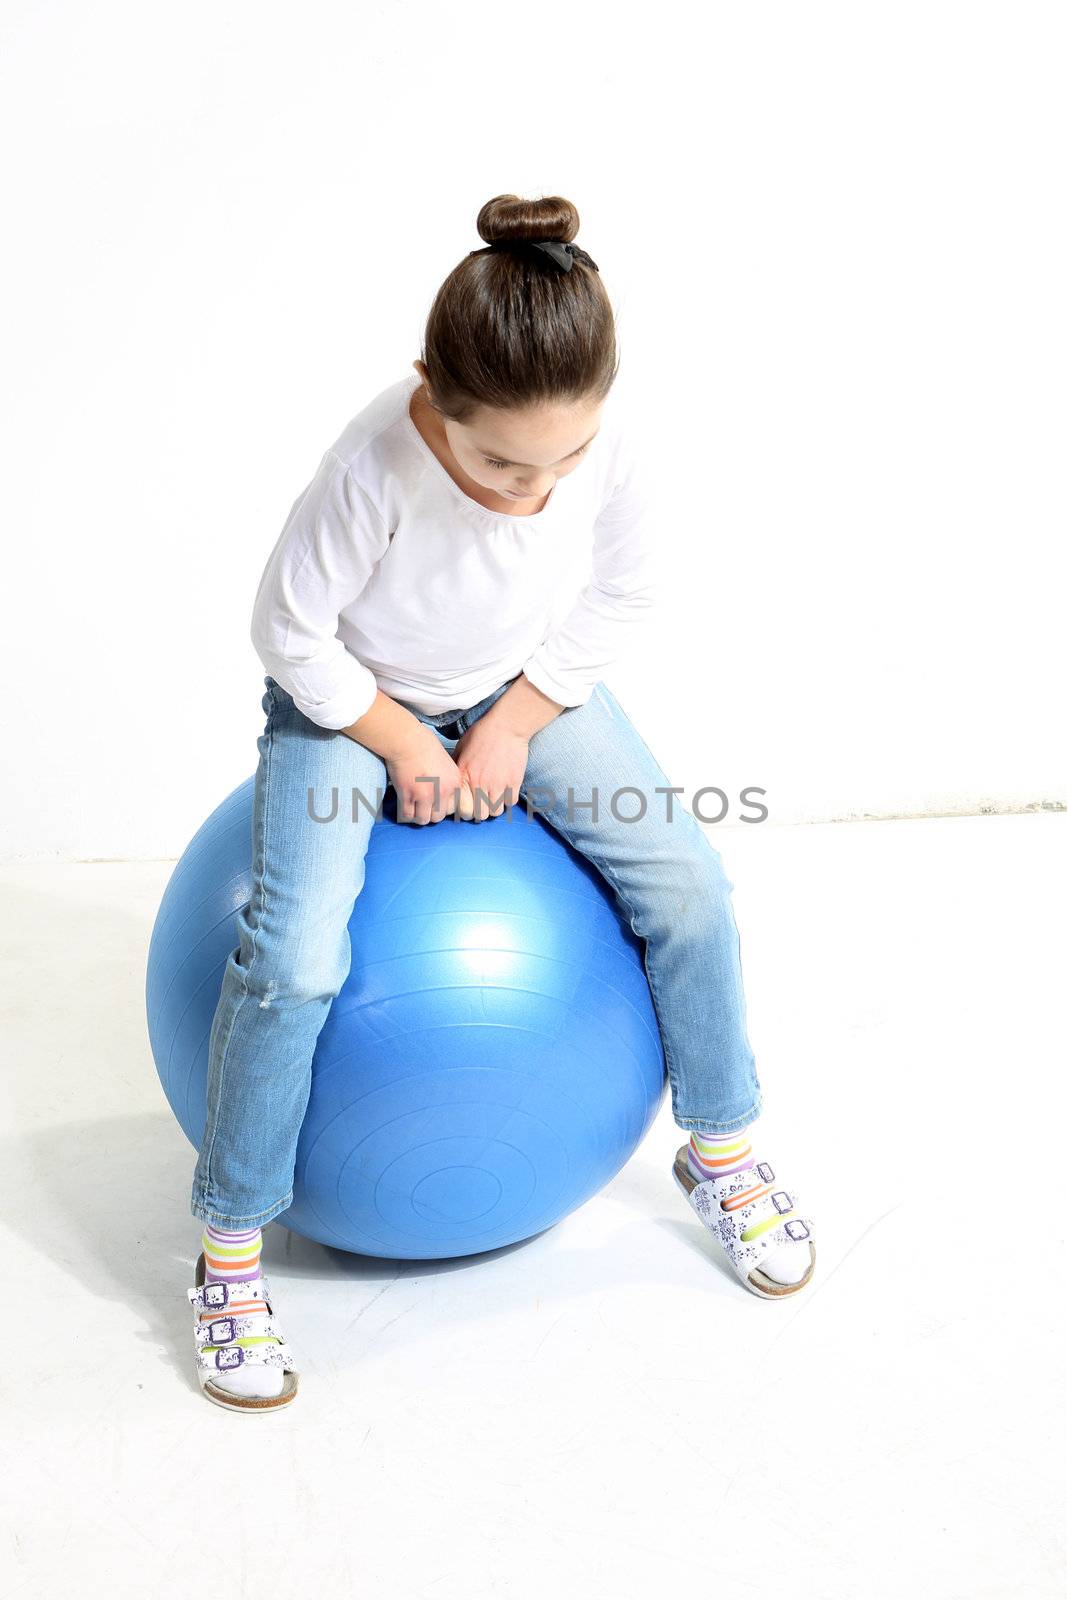 Little girl posing with a rubber ball by robert_przybysz